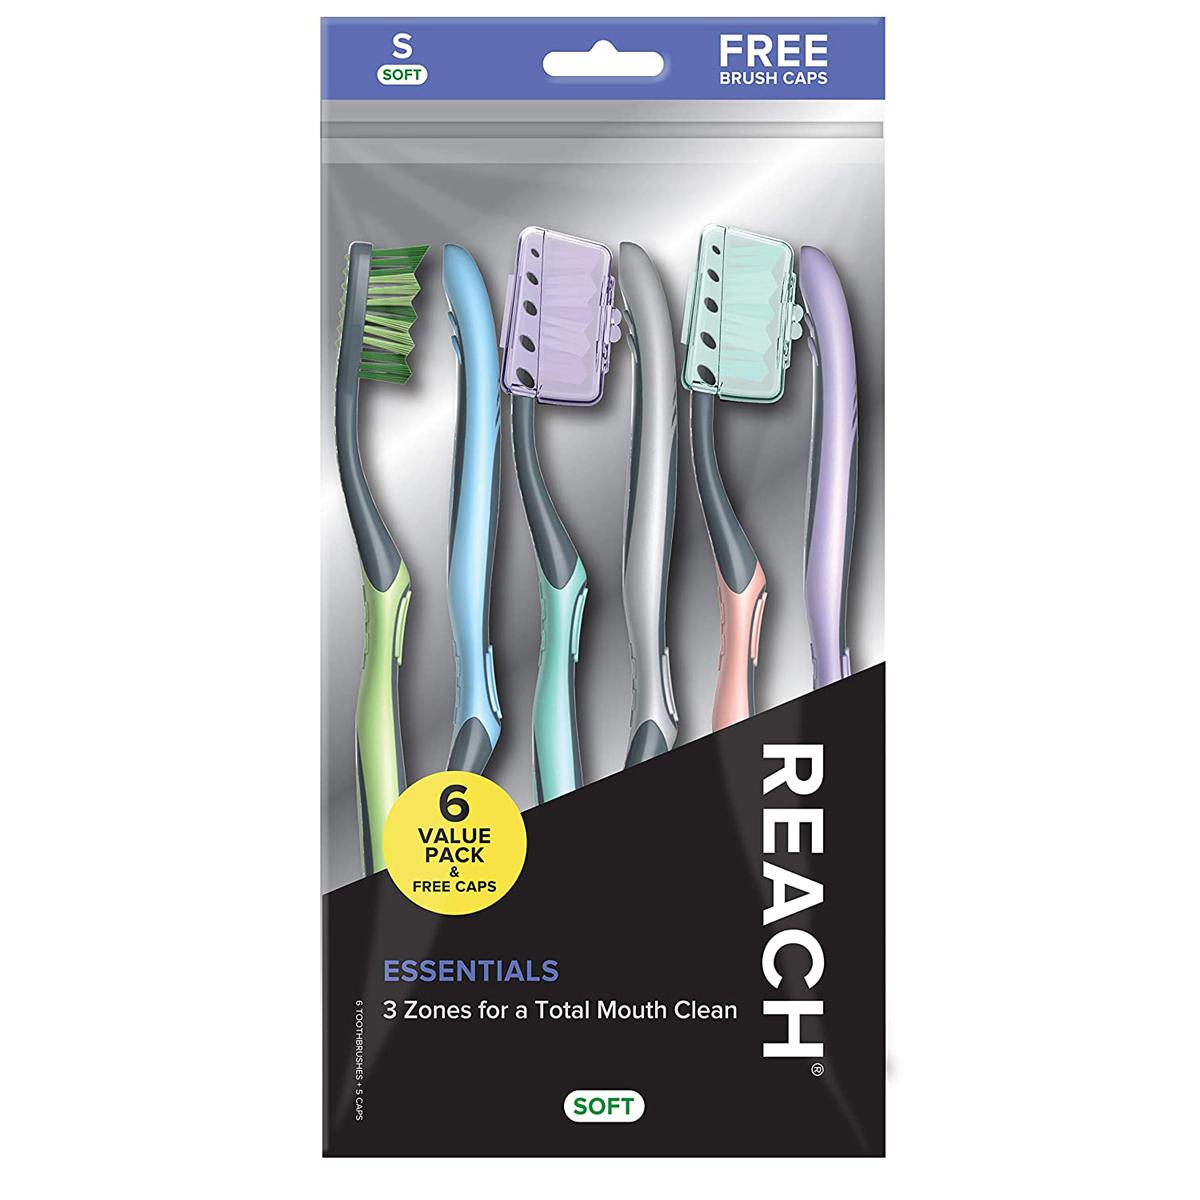 Reach Essentials Toothbrush with Tongue Scraper 6 Count for $3.09 Shipped